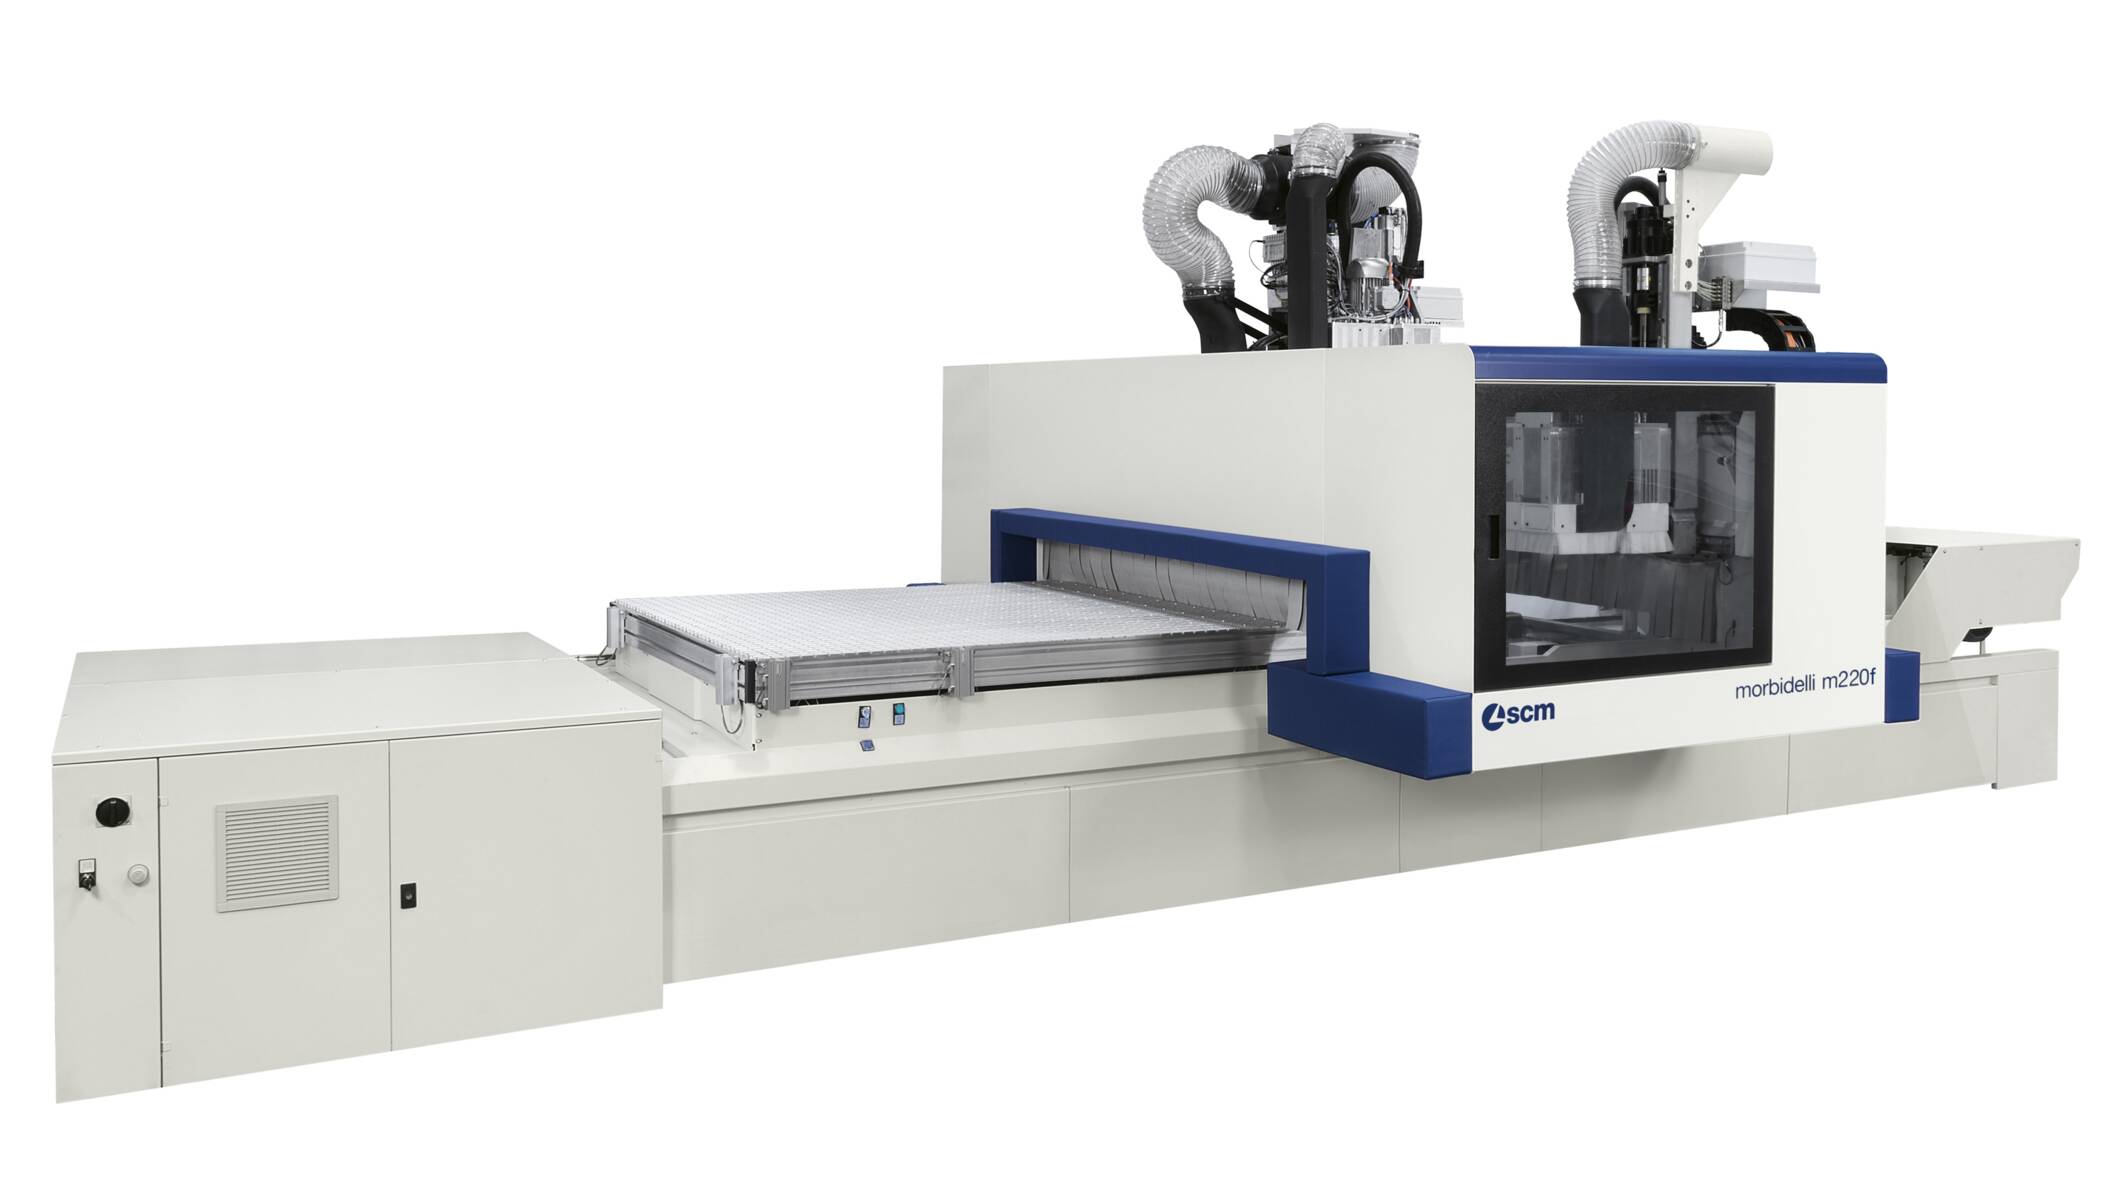 CNC Machining Centers - CNC Nesting Machining Centers for routing and drilling - morbidelli m220f